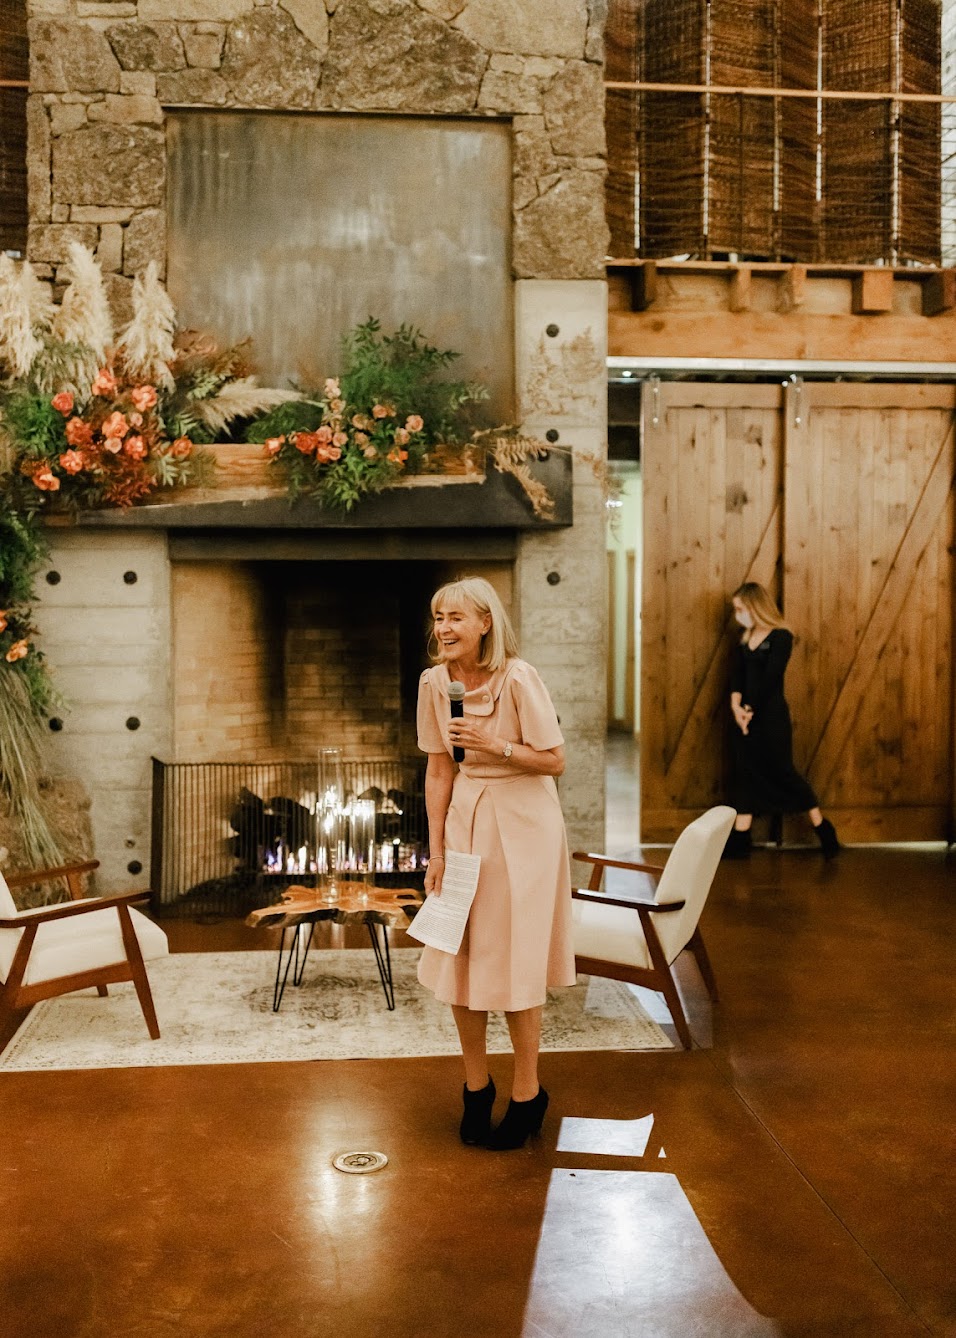 Mother of the bride gives a speech. She stands in front of the lit fireplace with the stunning floral installation on it. She is laughing as she holds the microphone and her paper.